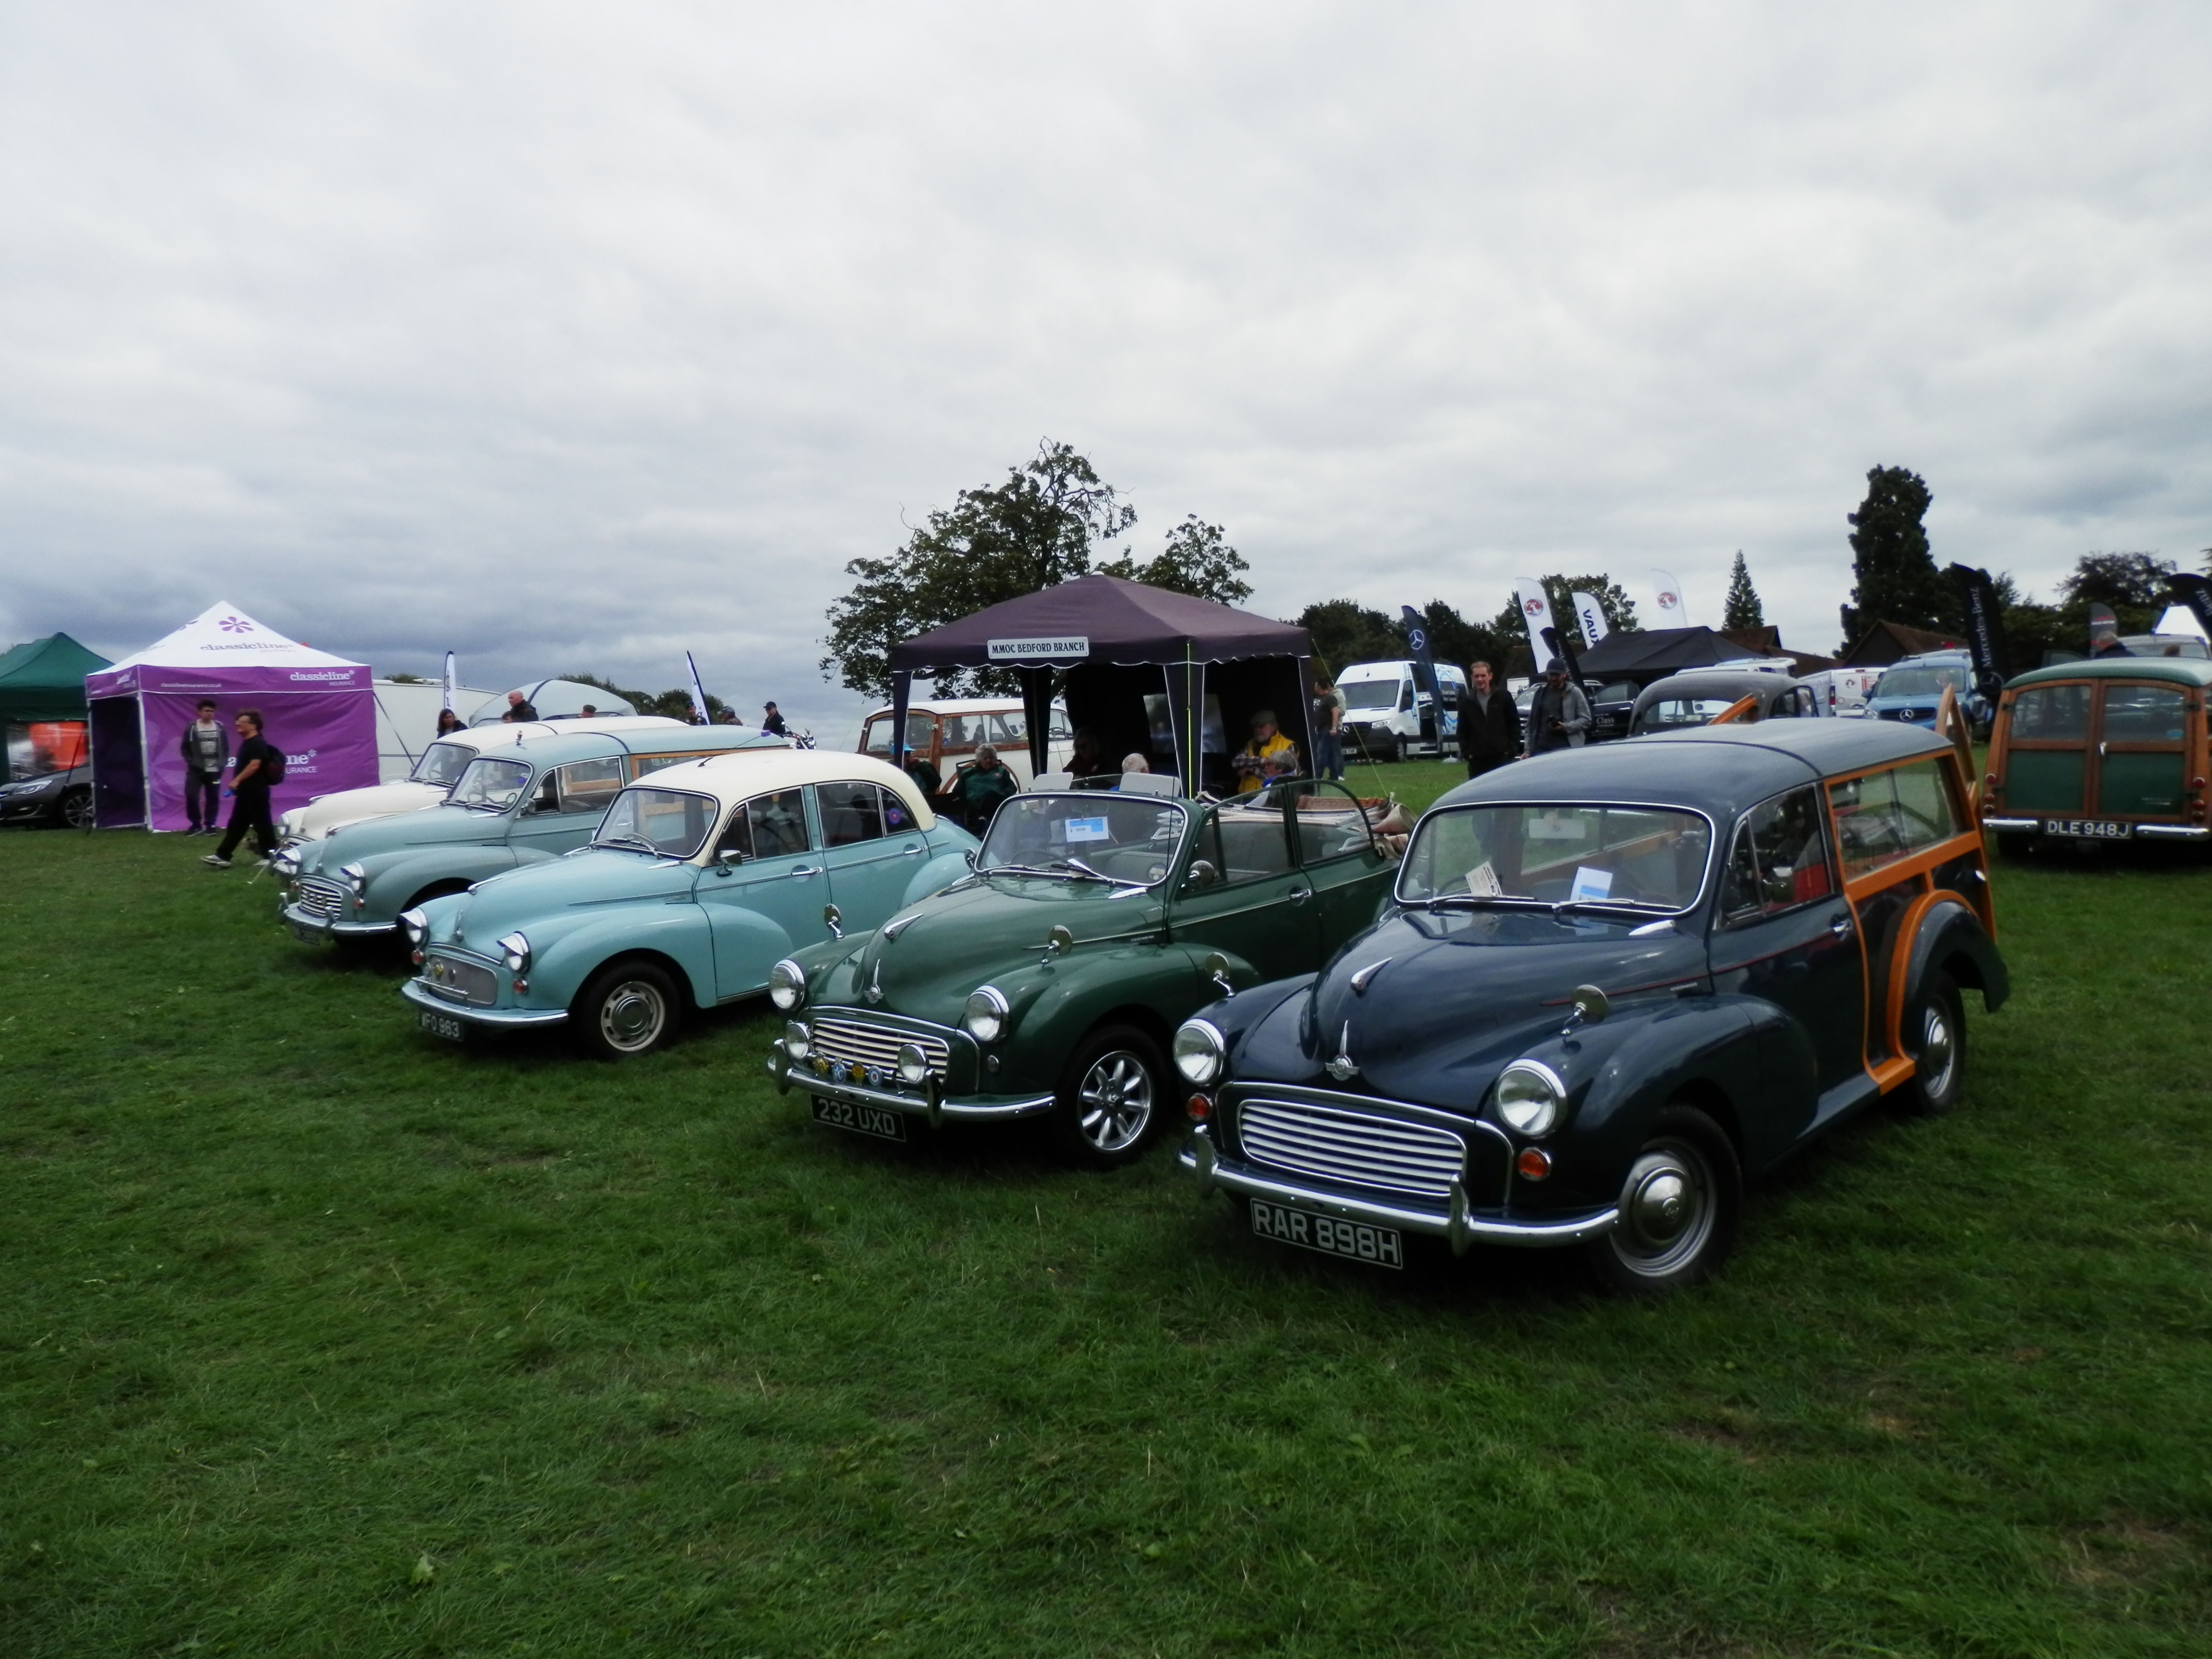 Knebworth Classic Car Show - 27 August 2018